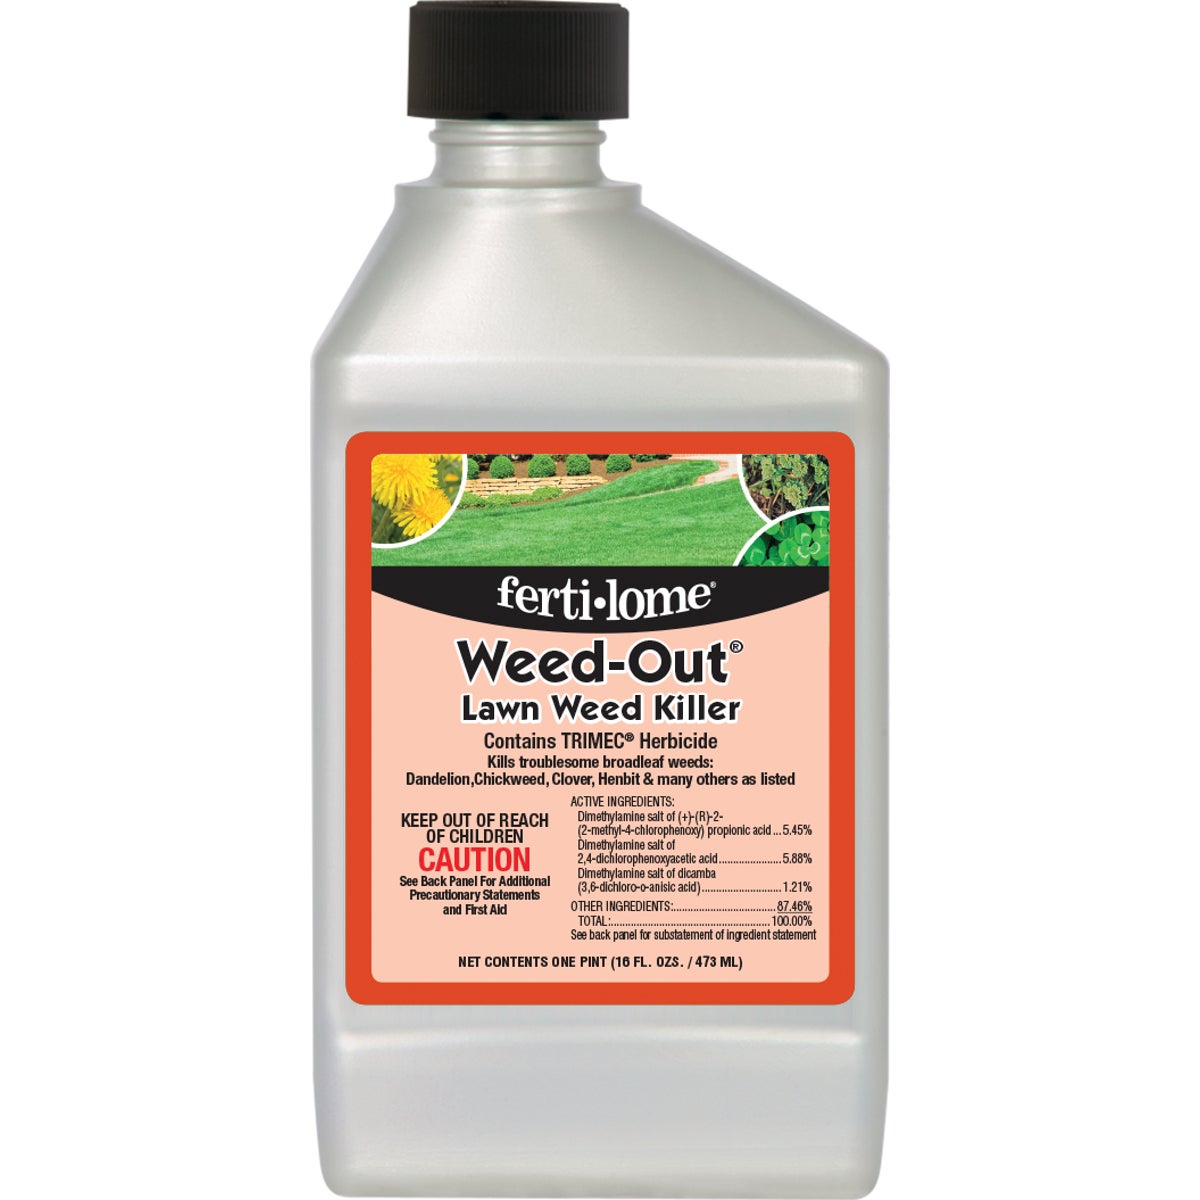 Ferti-lome Weed-Out 16 Oz. Concentrate Lawn Weed Killer